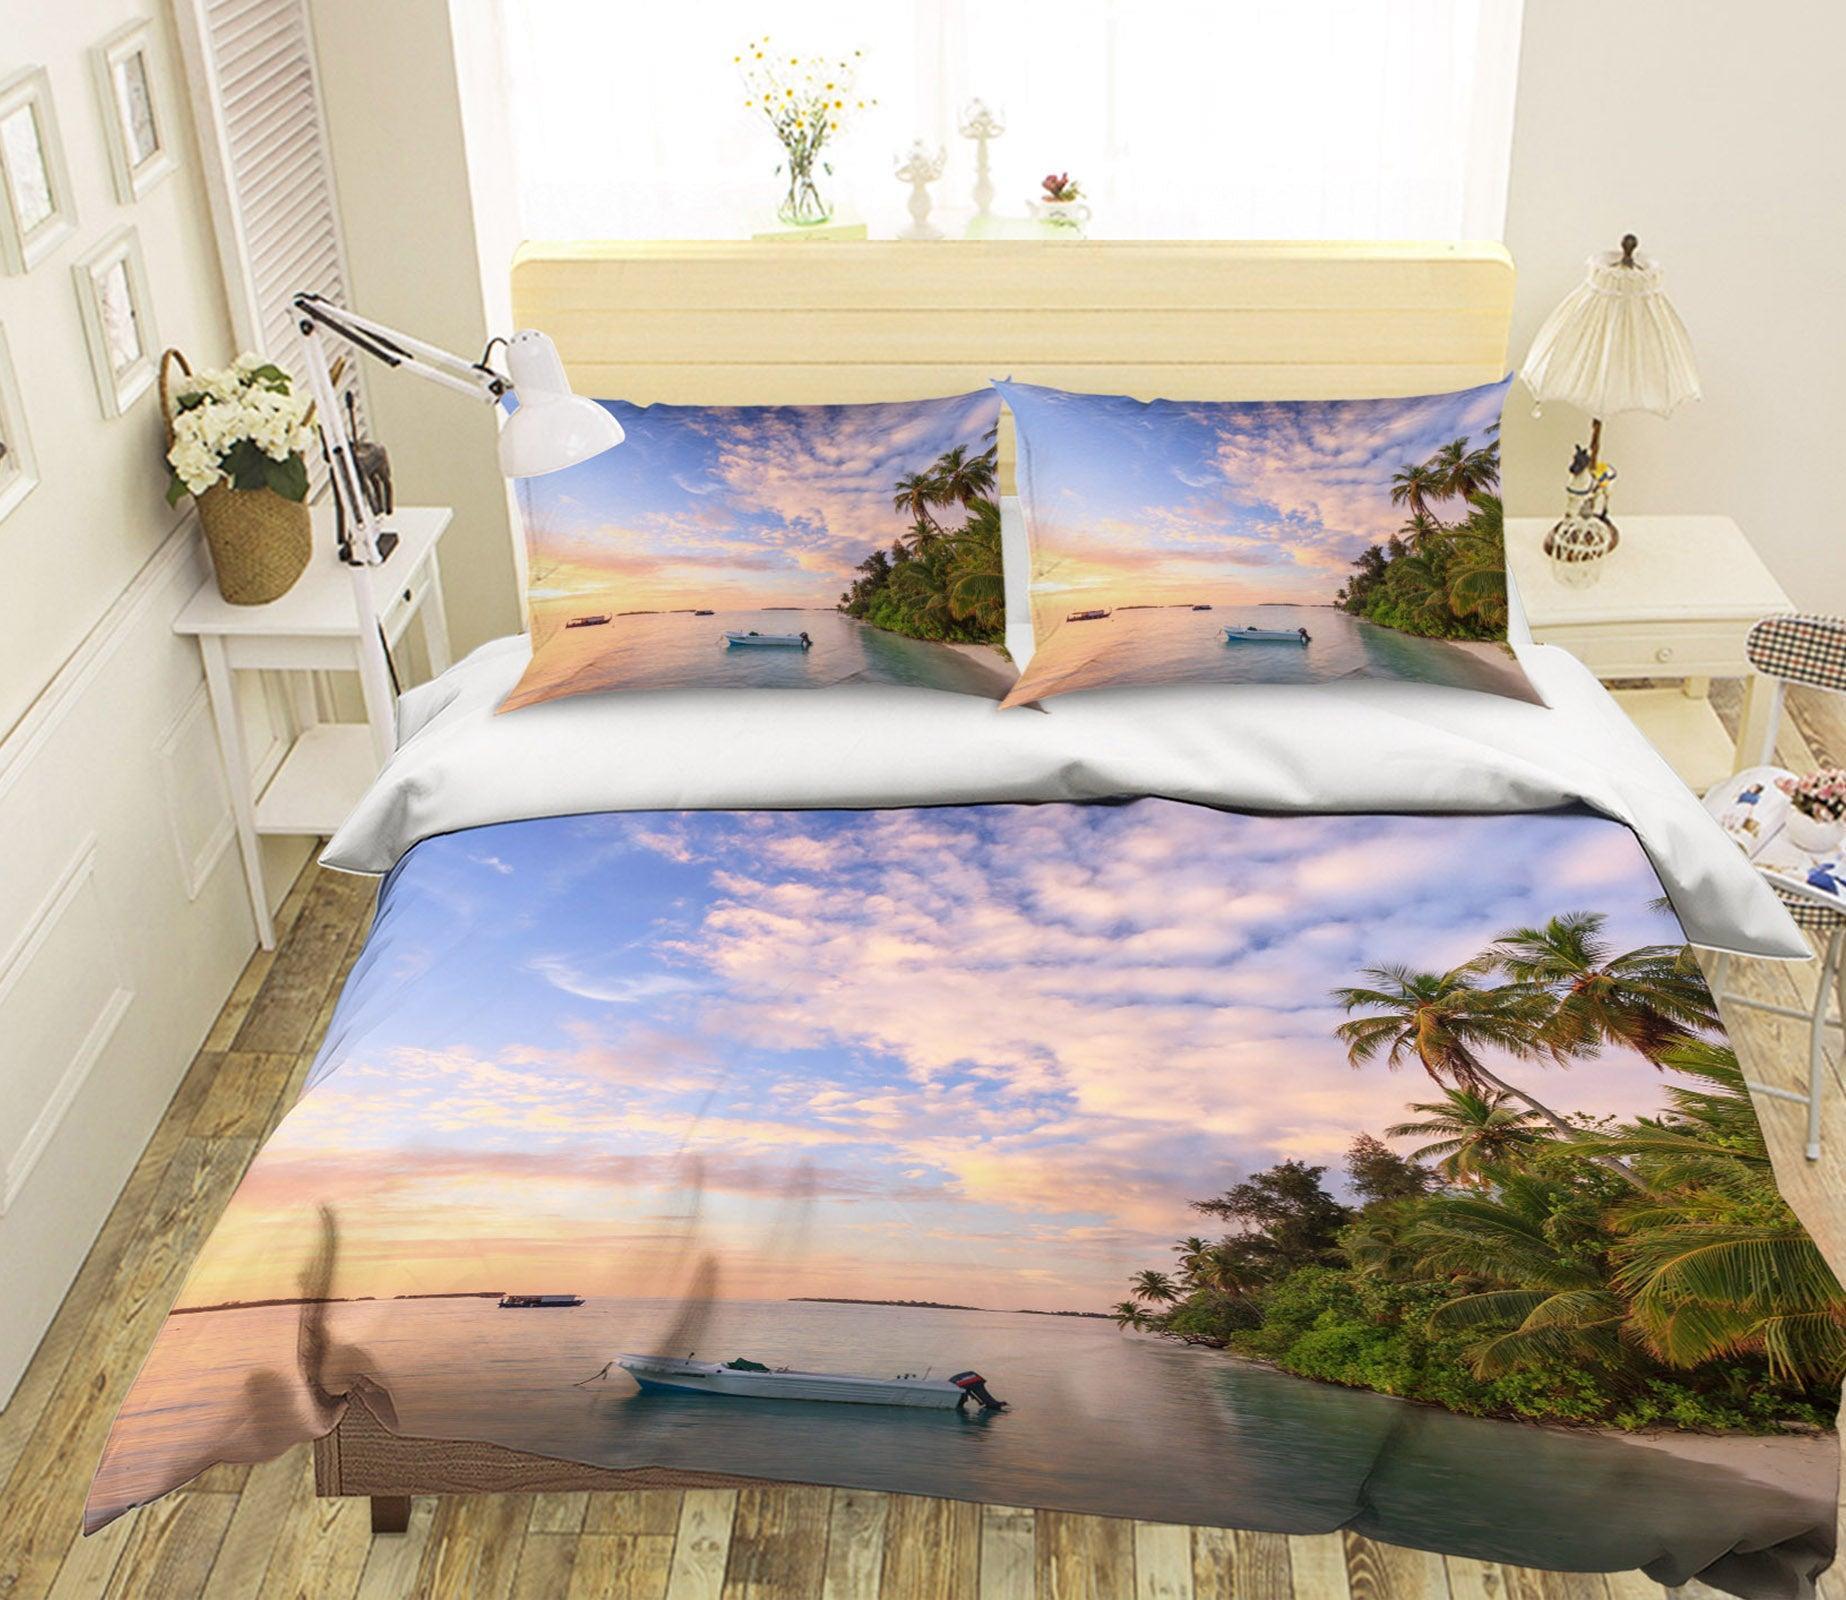 3D Seaside Woods 1828 Matteo Colombo Quilt Cover Set Bedding Set Pillowcases 3D Bed Pillowcases Quilt Duvet cover